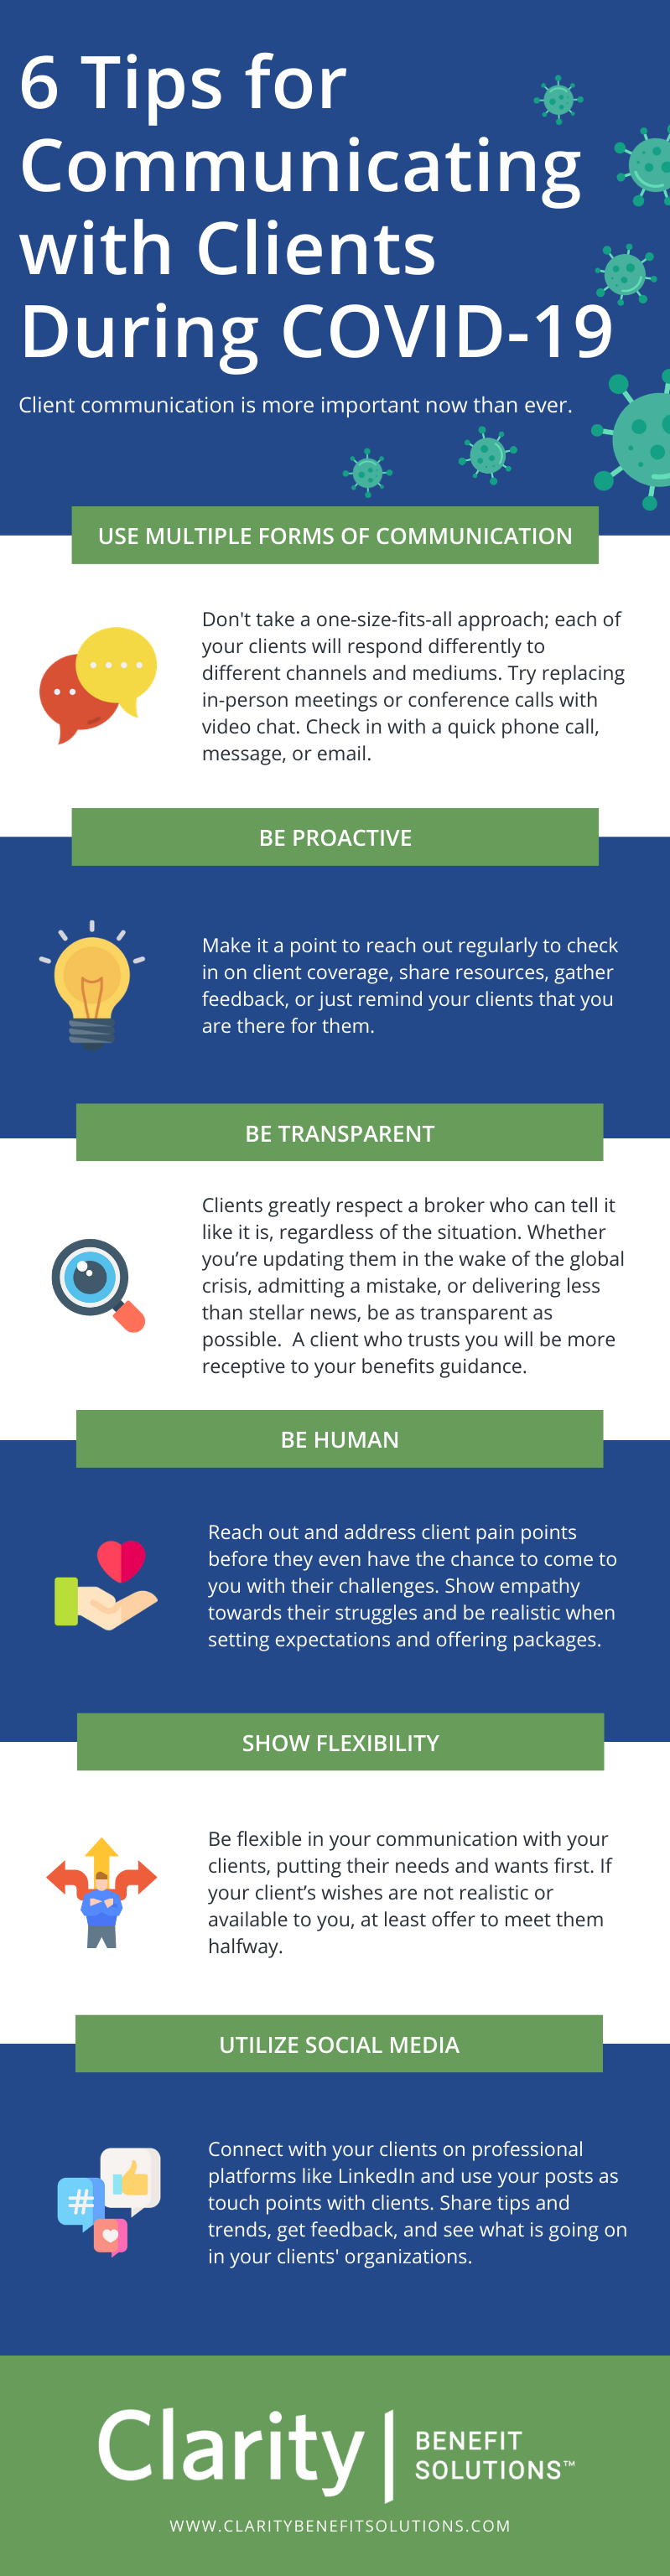 Tips for communication infographic